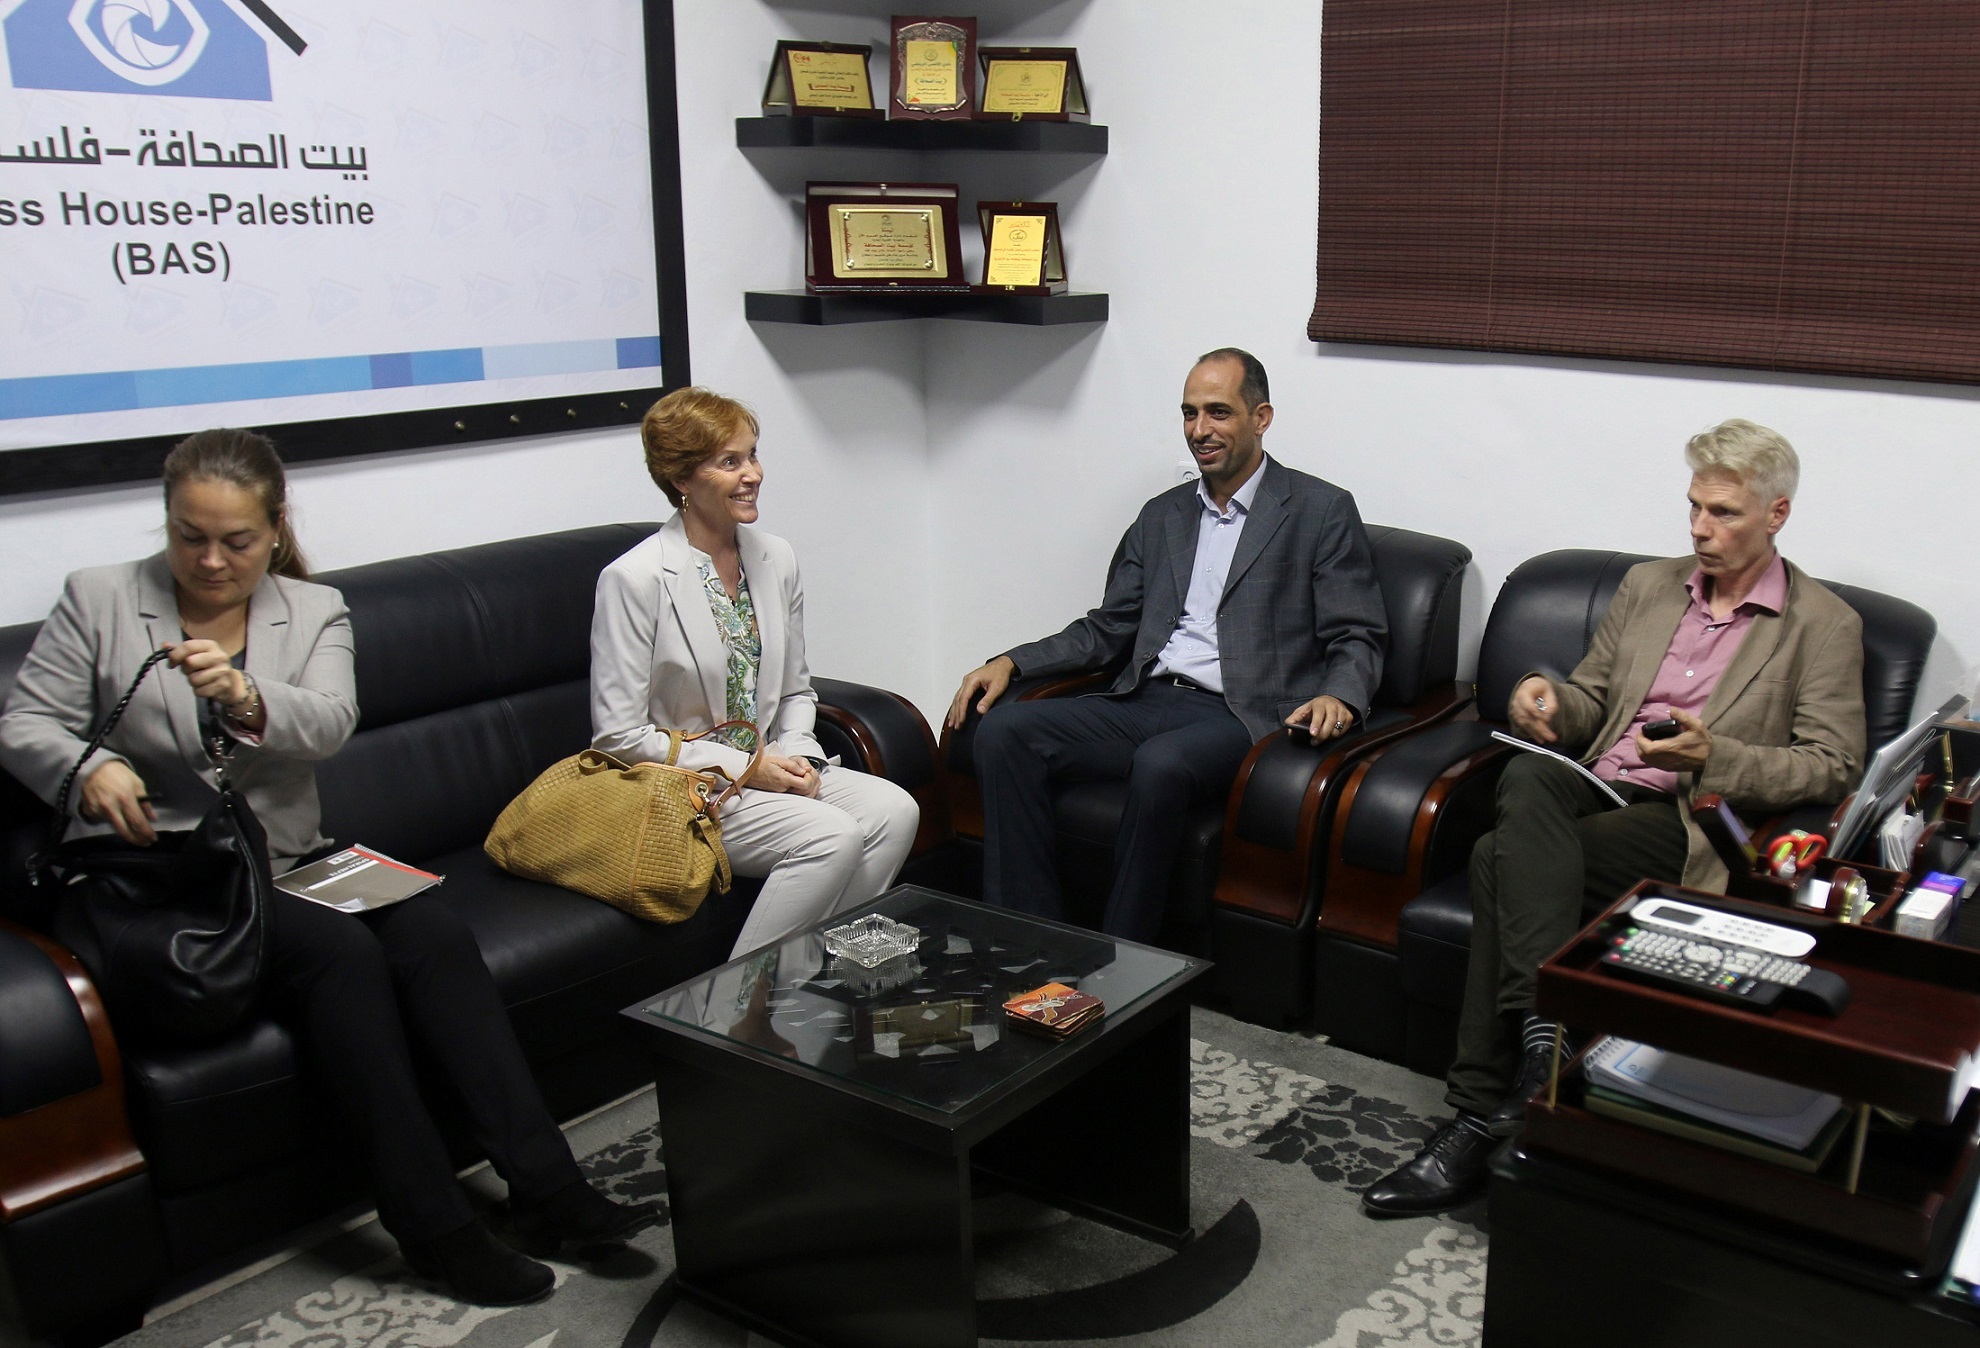 A Norwegian Delegation From Different Organizations Visit Press House